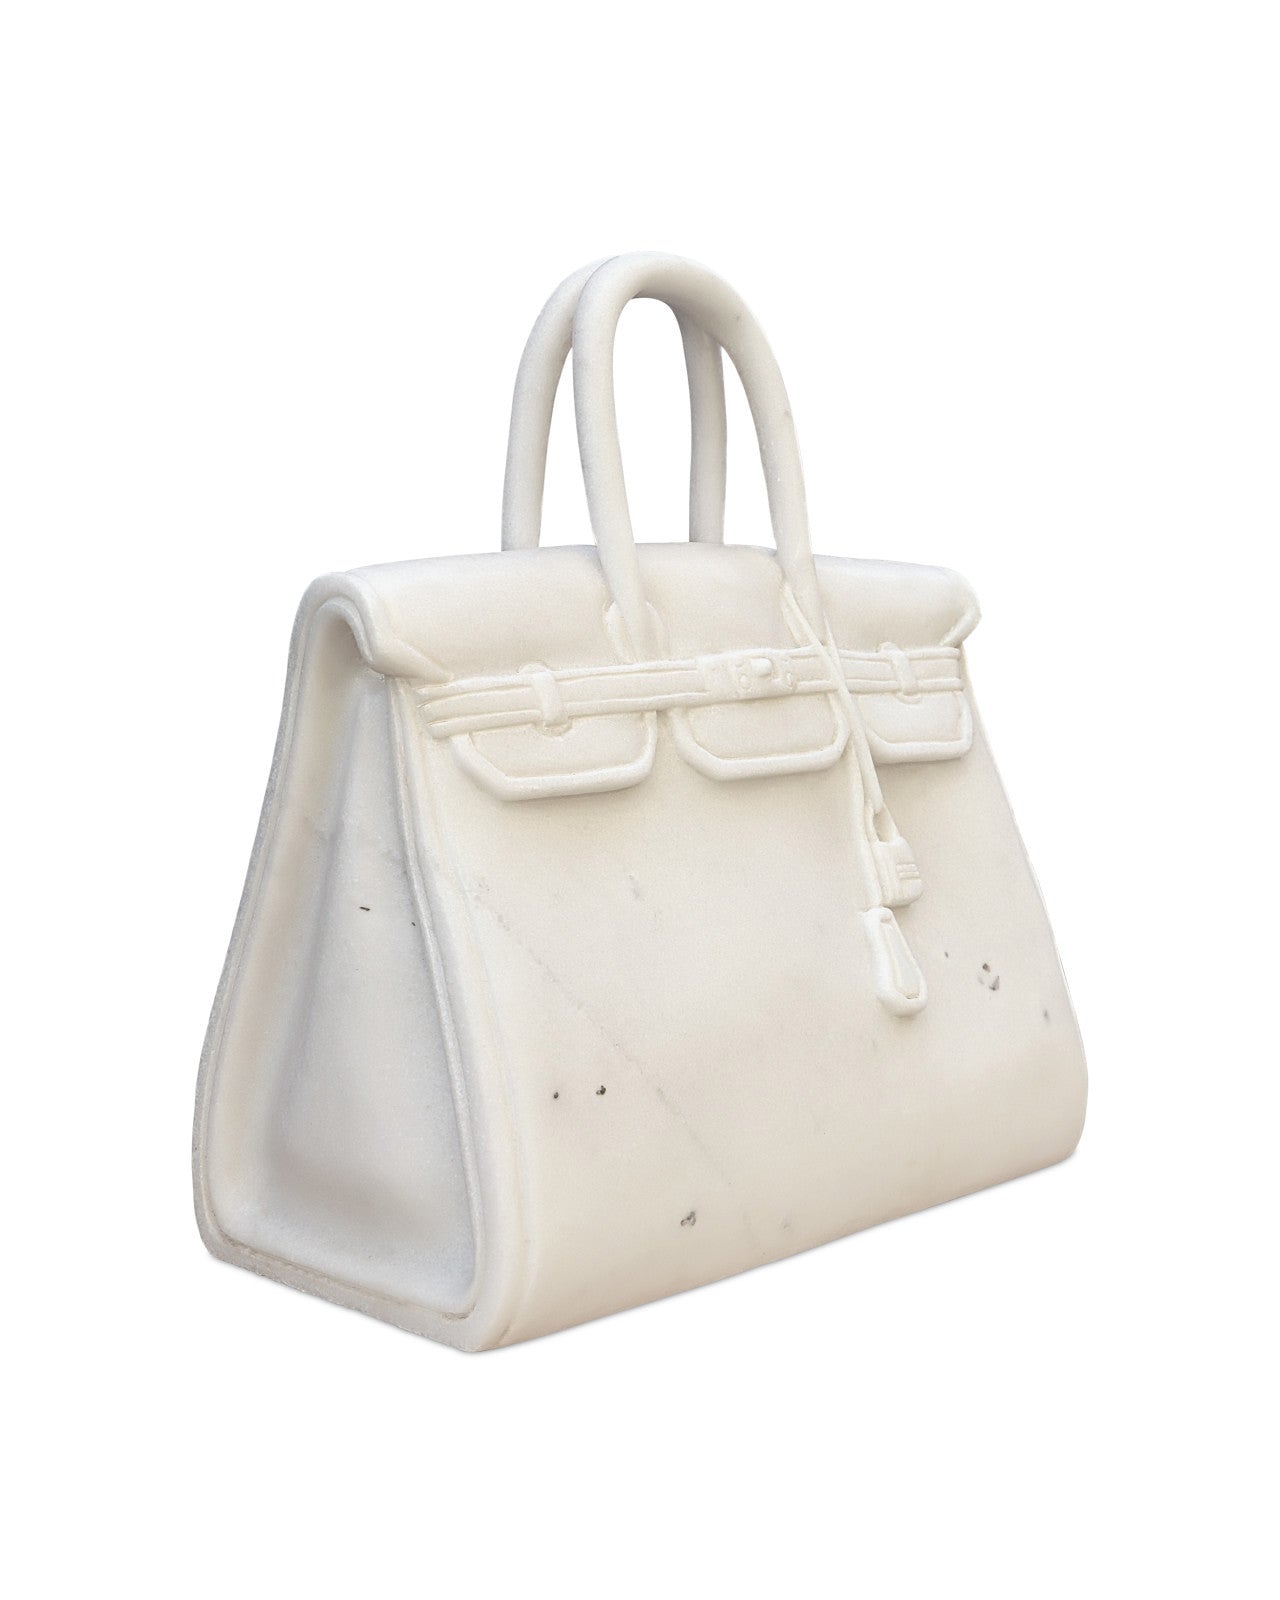 Marble Sculpture of The Princess by Currey and Company on ChicHomeVibes.com, showcasing a white marble replica Hermes Birkin Bag. This elegant piece emulates the iconic Hermes Birkin, capturing its distinctive style and luxury, perfect for chic home decor enthusiasts.